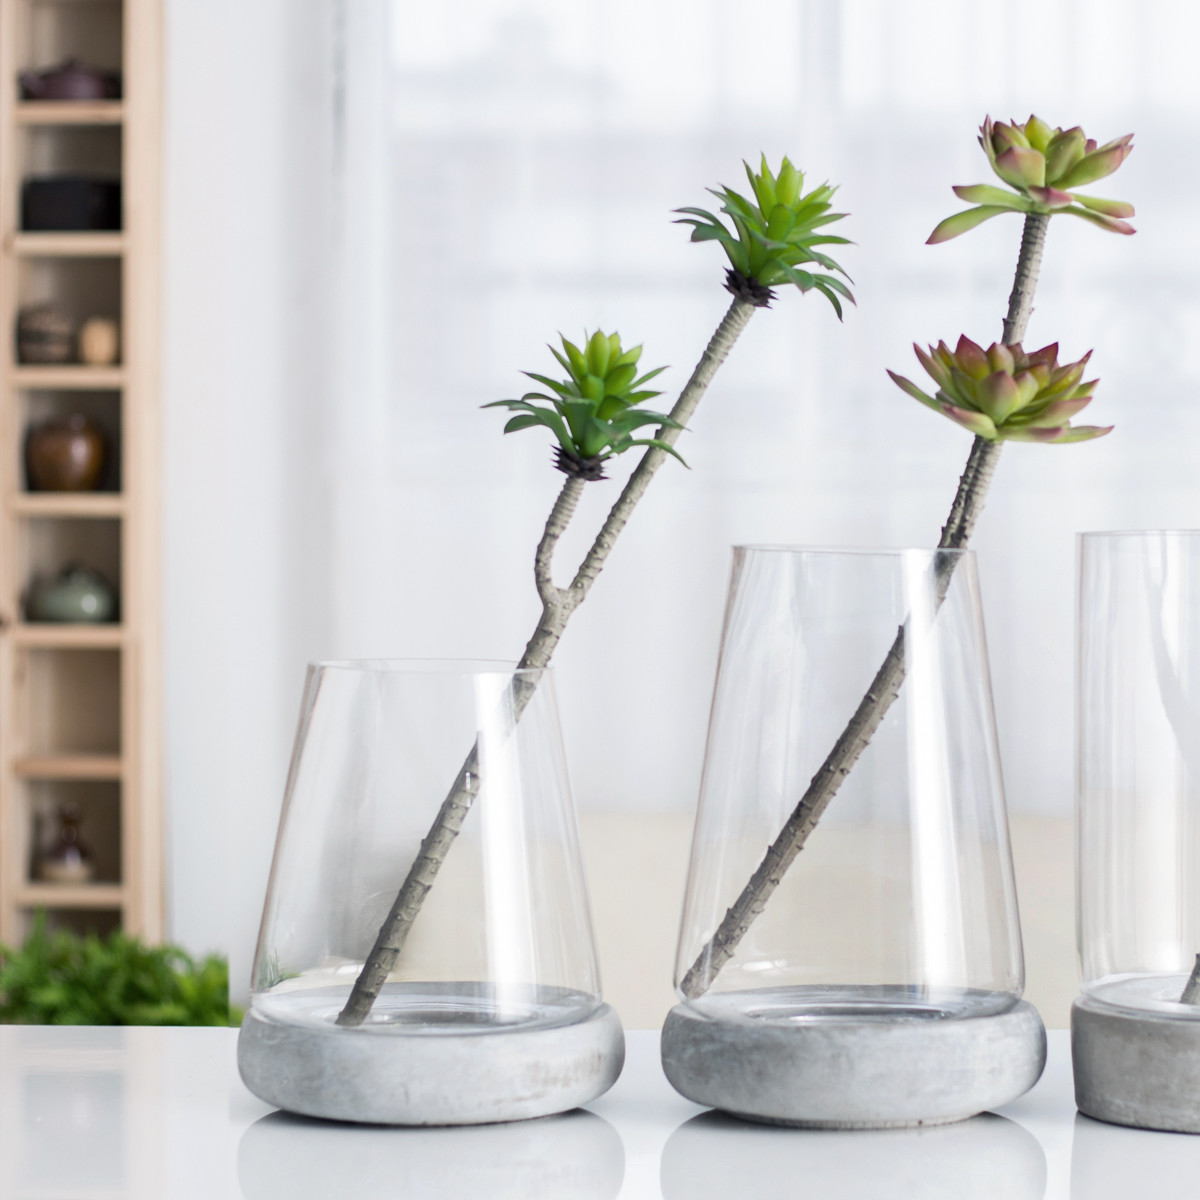 flowers in small glass vases of usd 25 42 sicily home cas series nordic minimalist glass vase inside sicily home cas series nordic minimalist glass vase cement underpinning home decoration flower arrangement